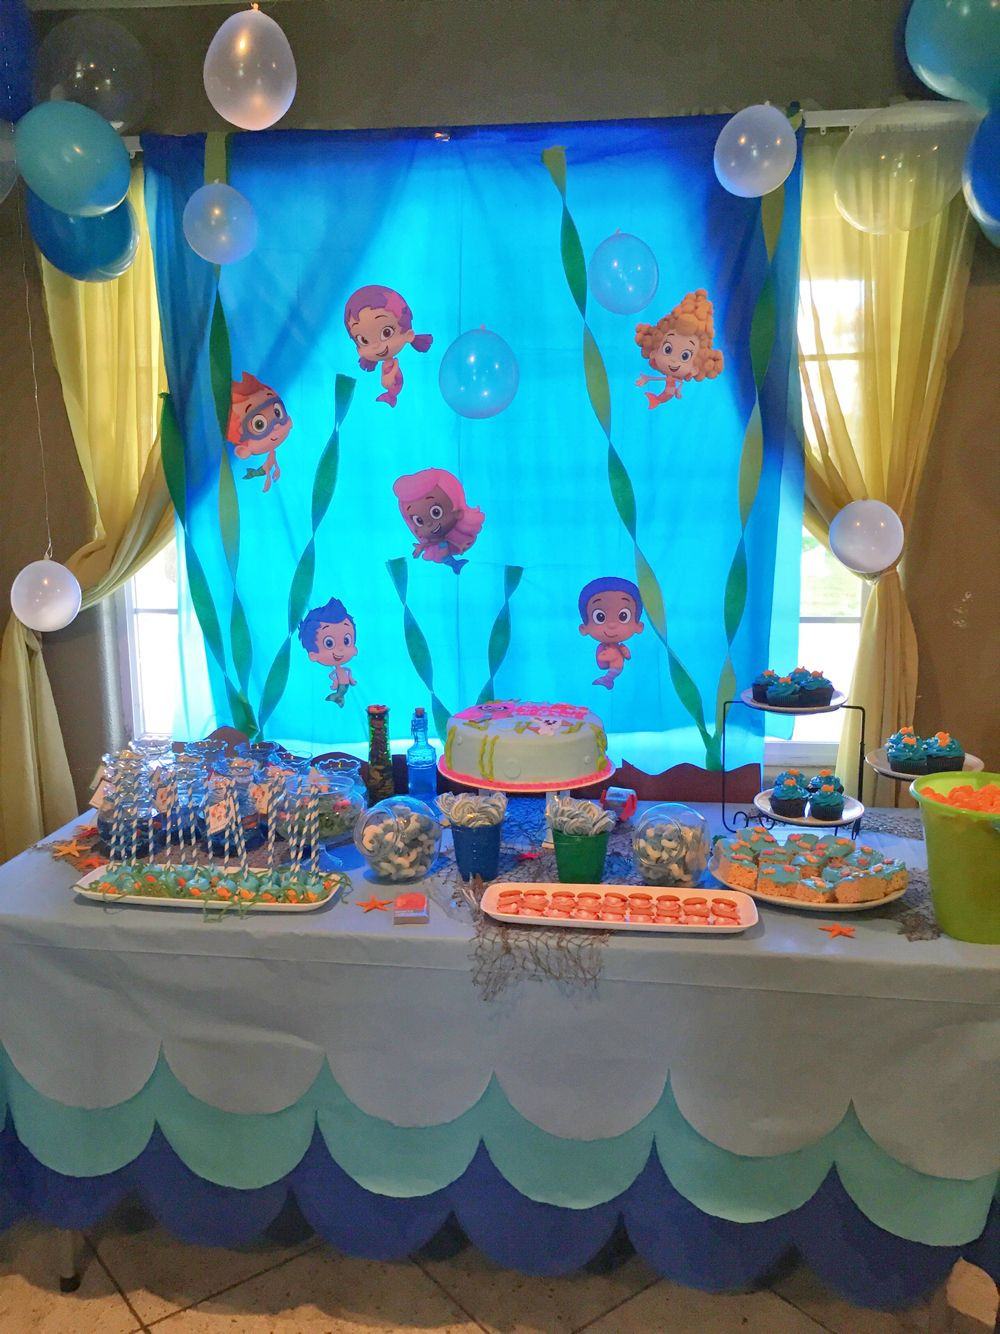 Bubble Guppies Birthday Party Decorations
 Bubble Guppies Birthday Party decorations in 2019